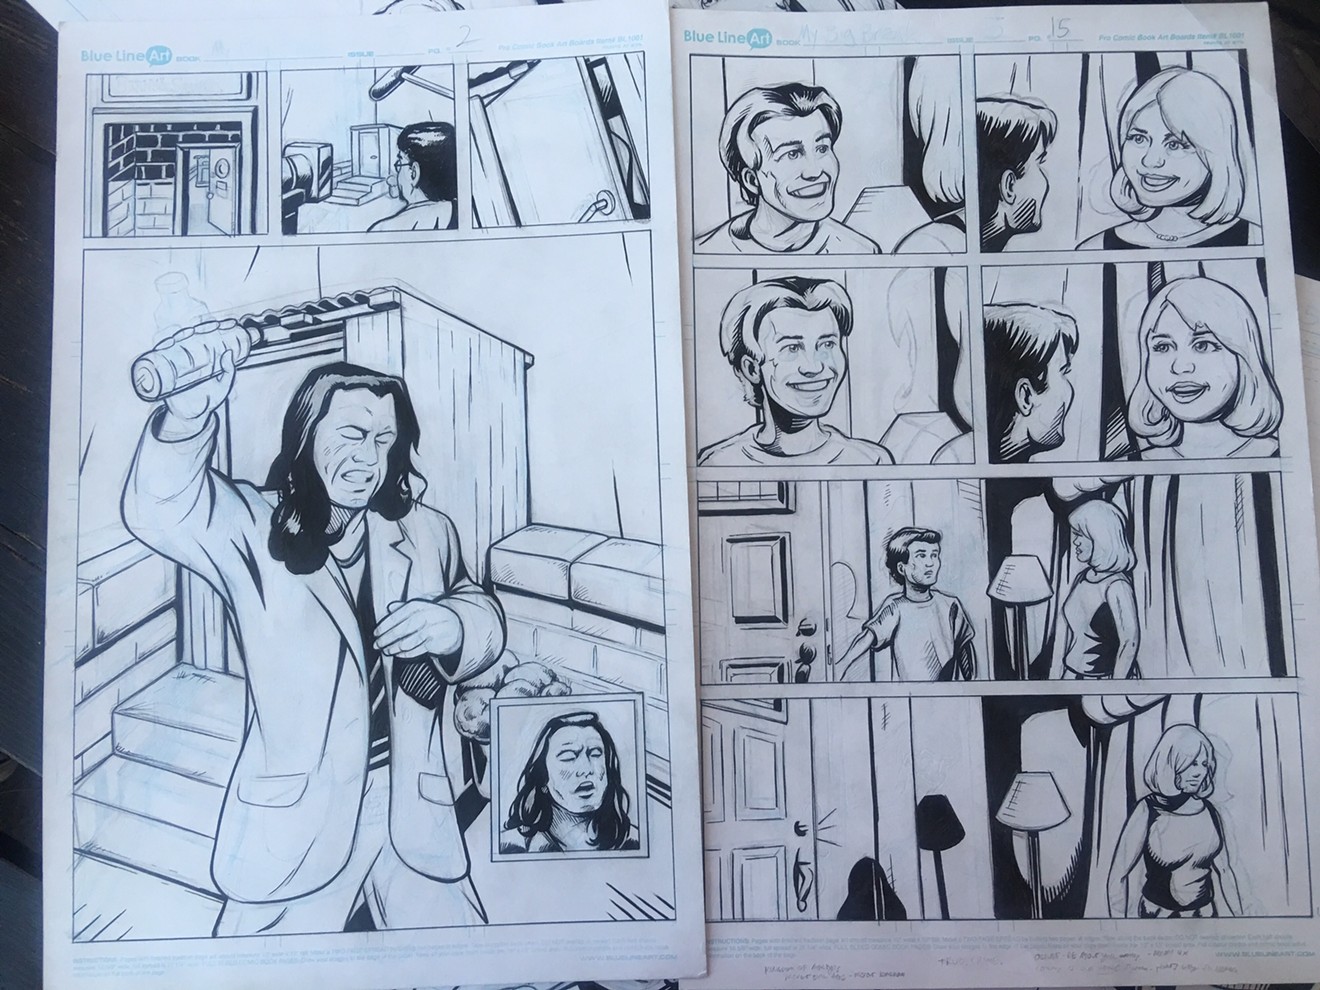 Interior pages from My Big Break.